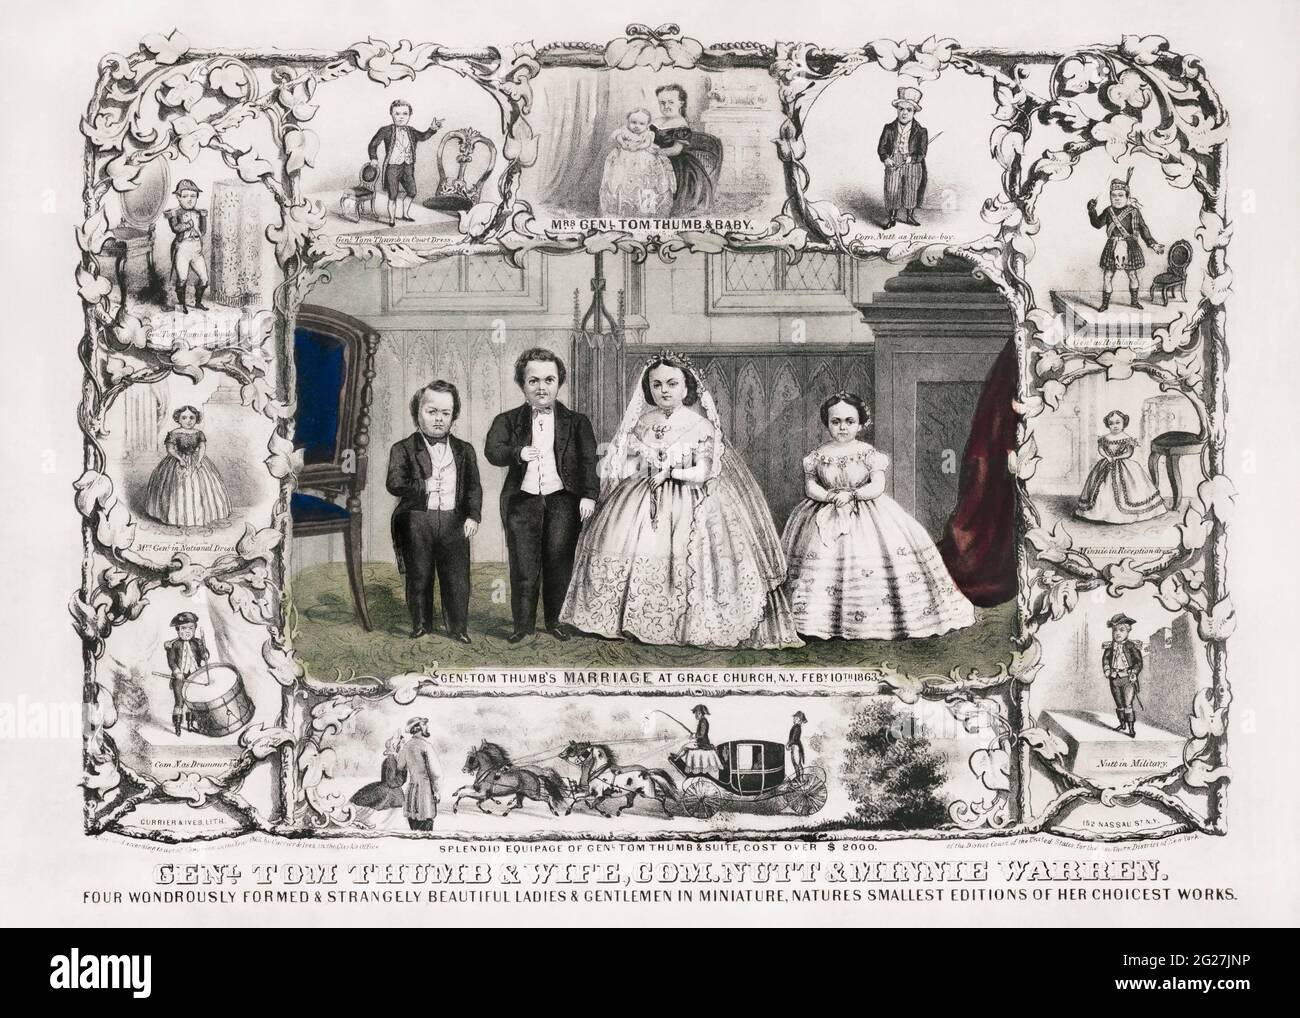 General Tom Thumb and his wife Lavinia Warren, on the day of their wedding. Stock Photo